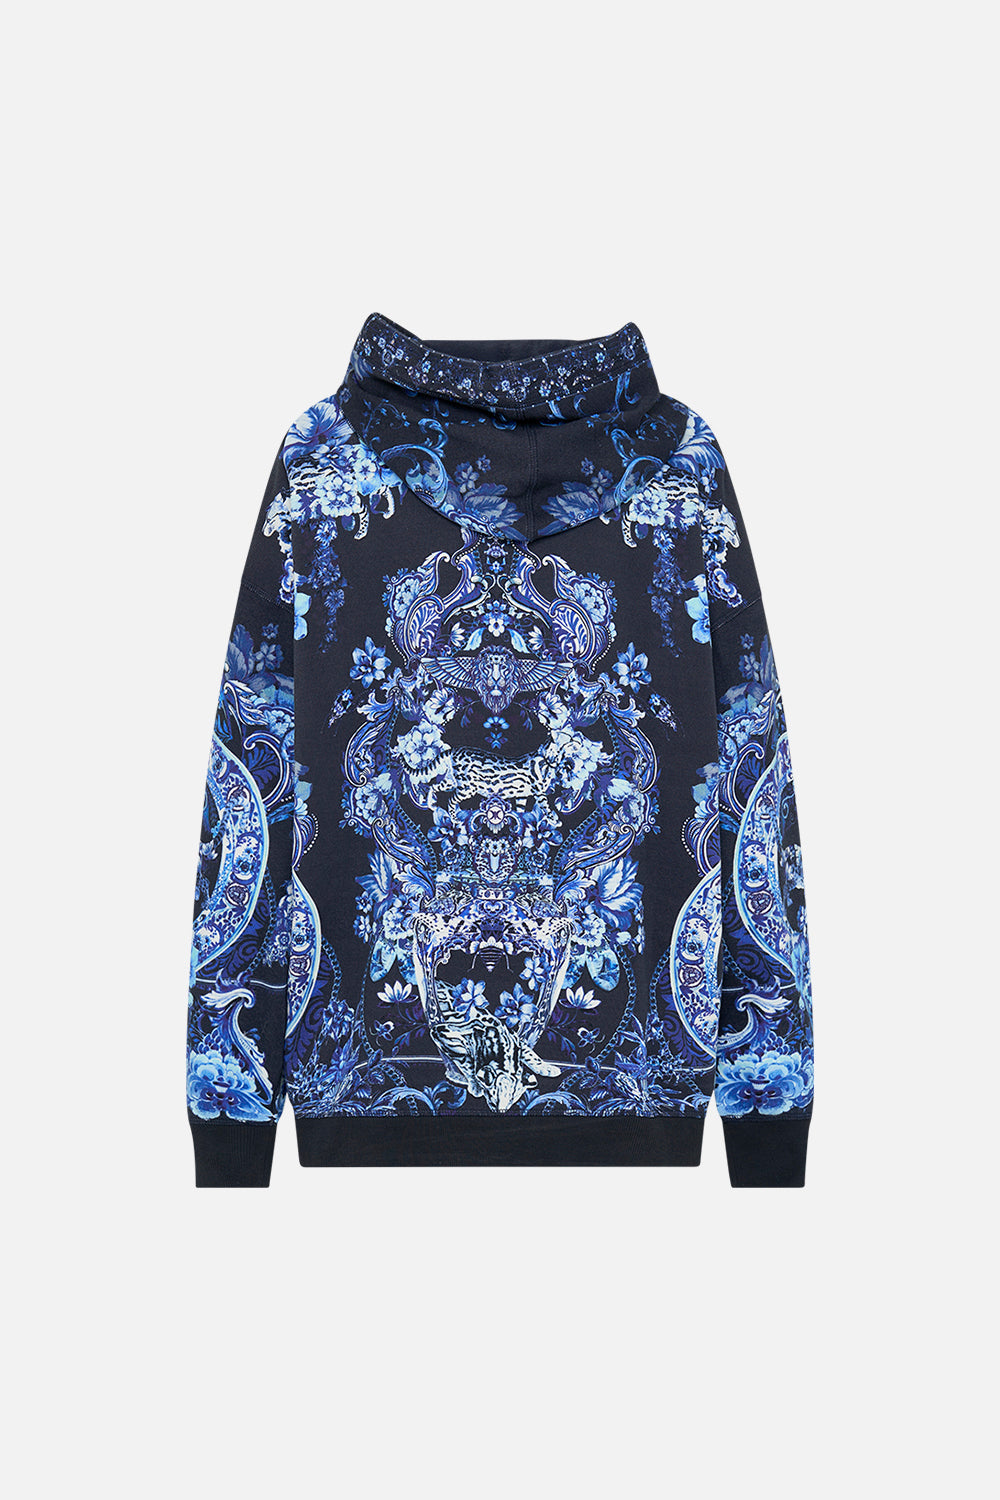 Back view of CAMILLA printed hoodie in Delft Dynasty print